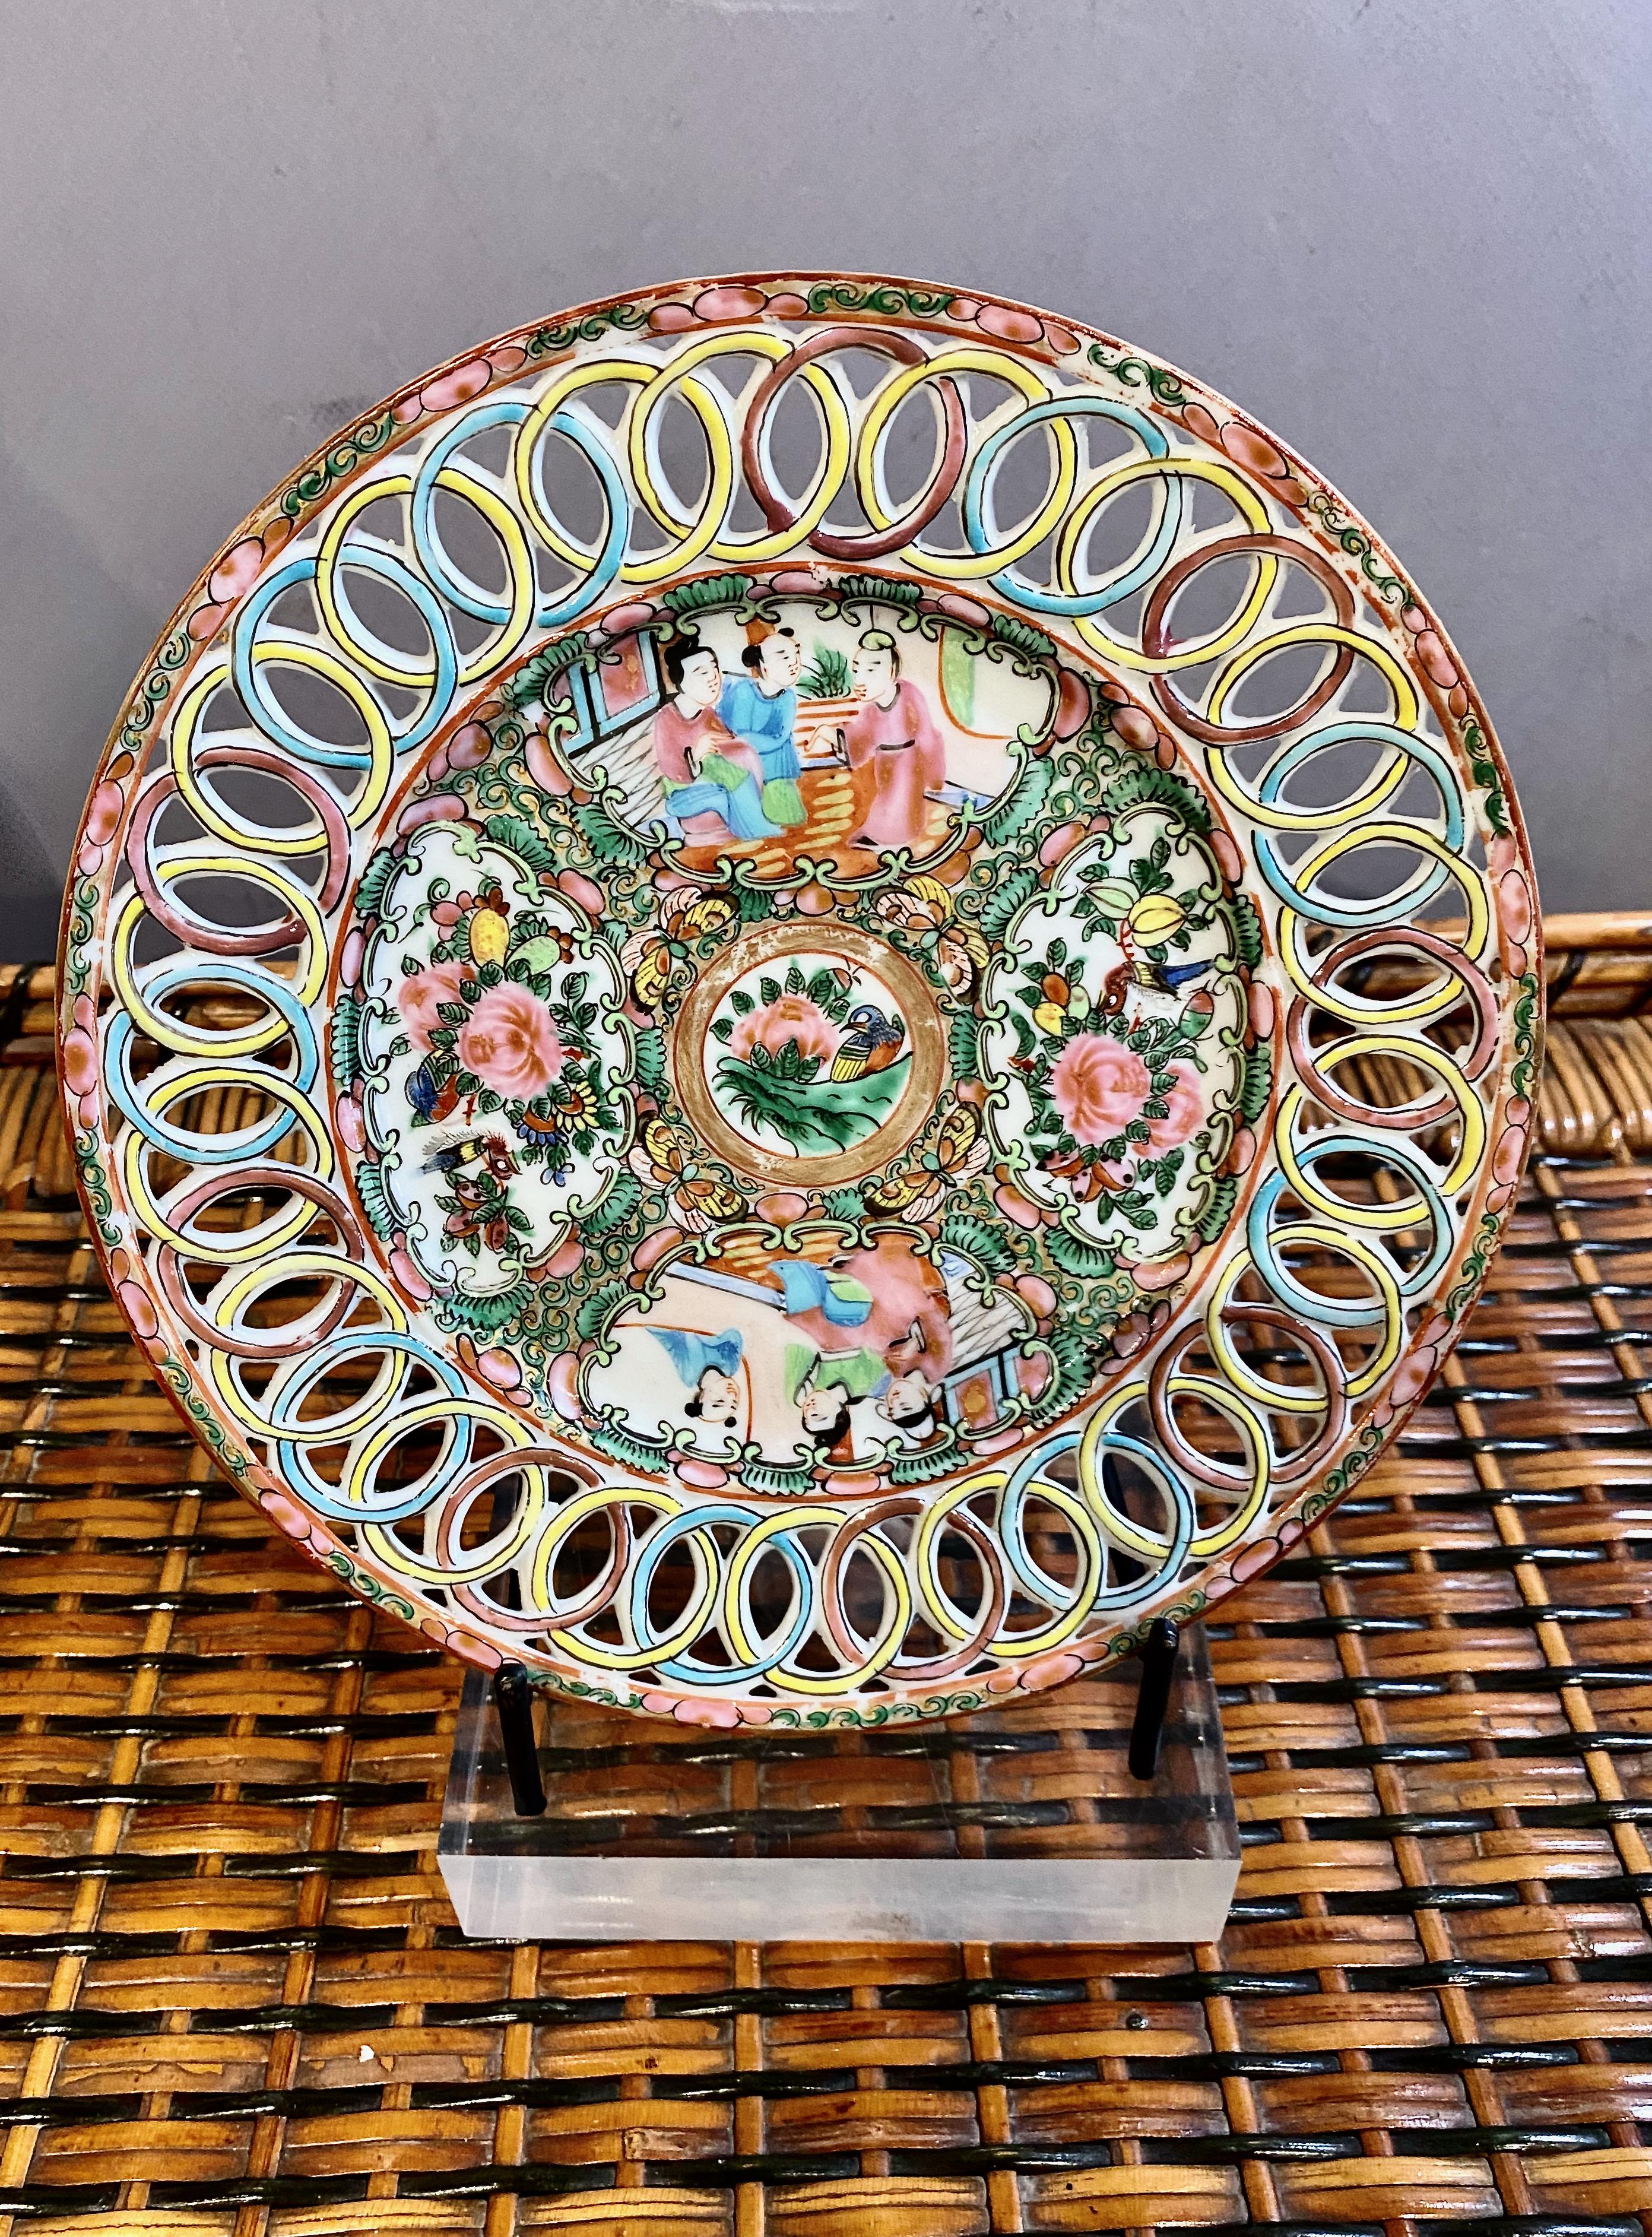 This is a very good example of a c. 1820-1840 Chinese Export Rose Medallion Reticulated plate. The plate is finely decorated with the traditional Medallion design of reserves of florals and a court scene. The plate is in overall very good to